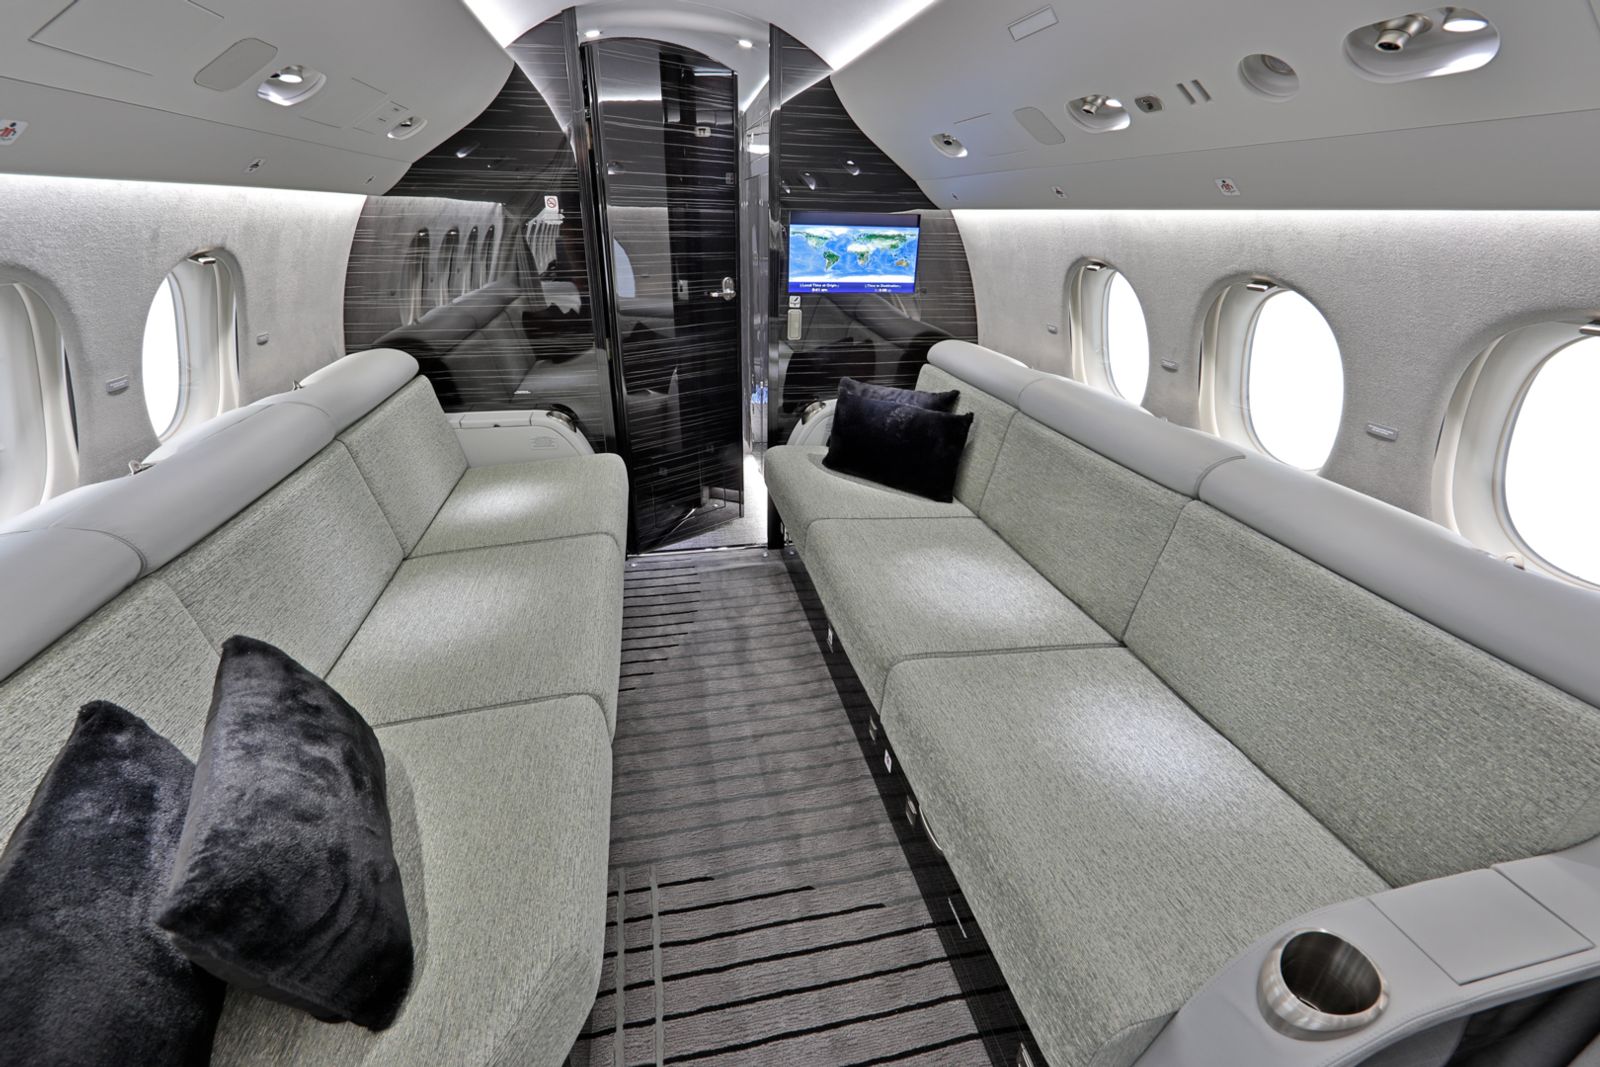 Dassault Falcon 7X  S/N 152 for sale | gallery image: /userfiles/images/F7X_sn152/aft%20aft.jpg